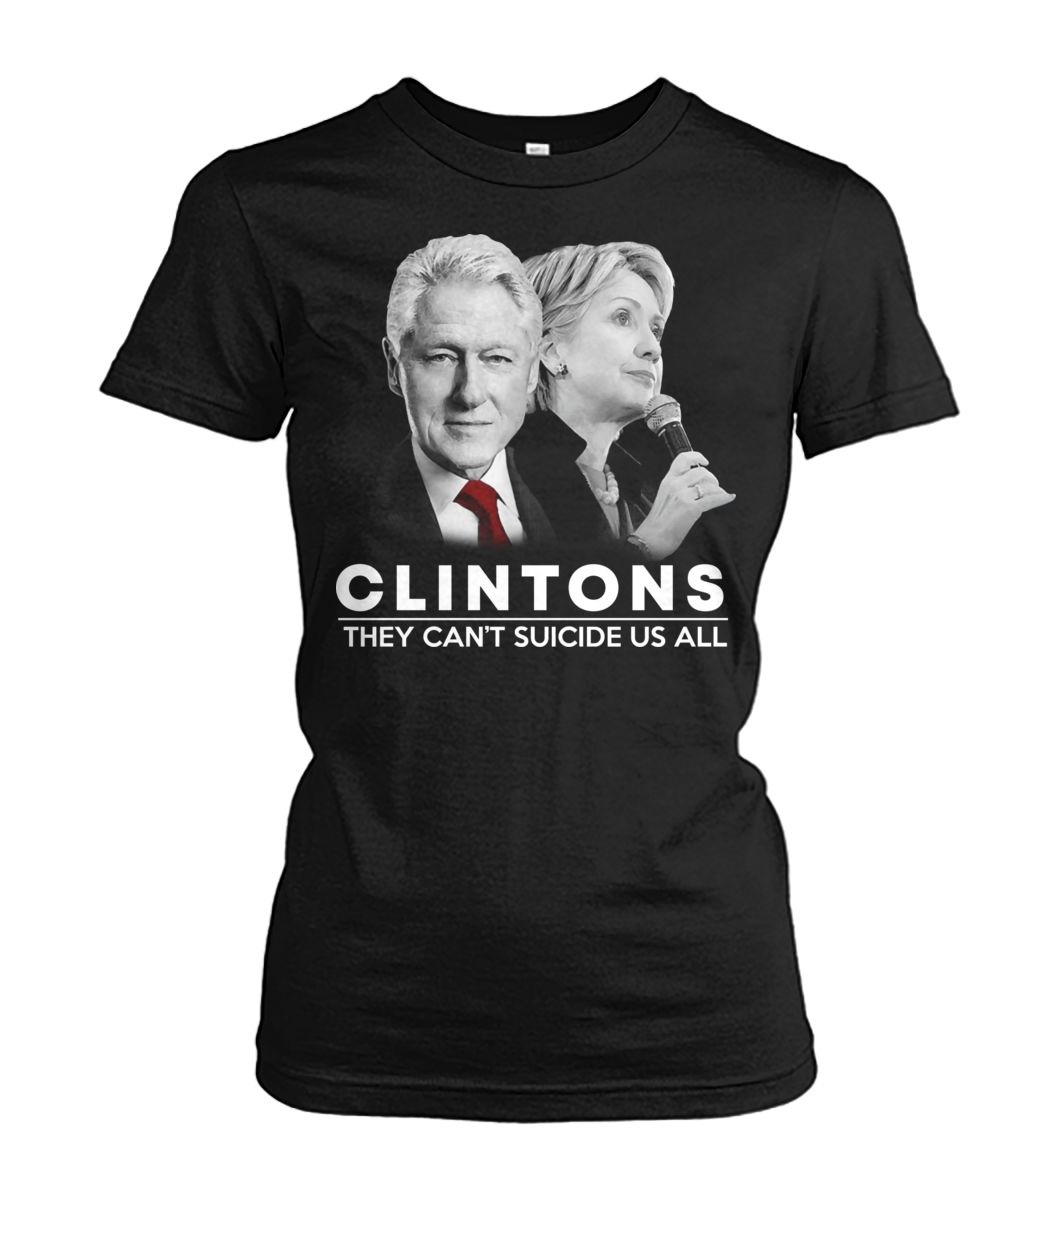 Clinton they can't suicide us all women's crew tee